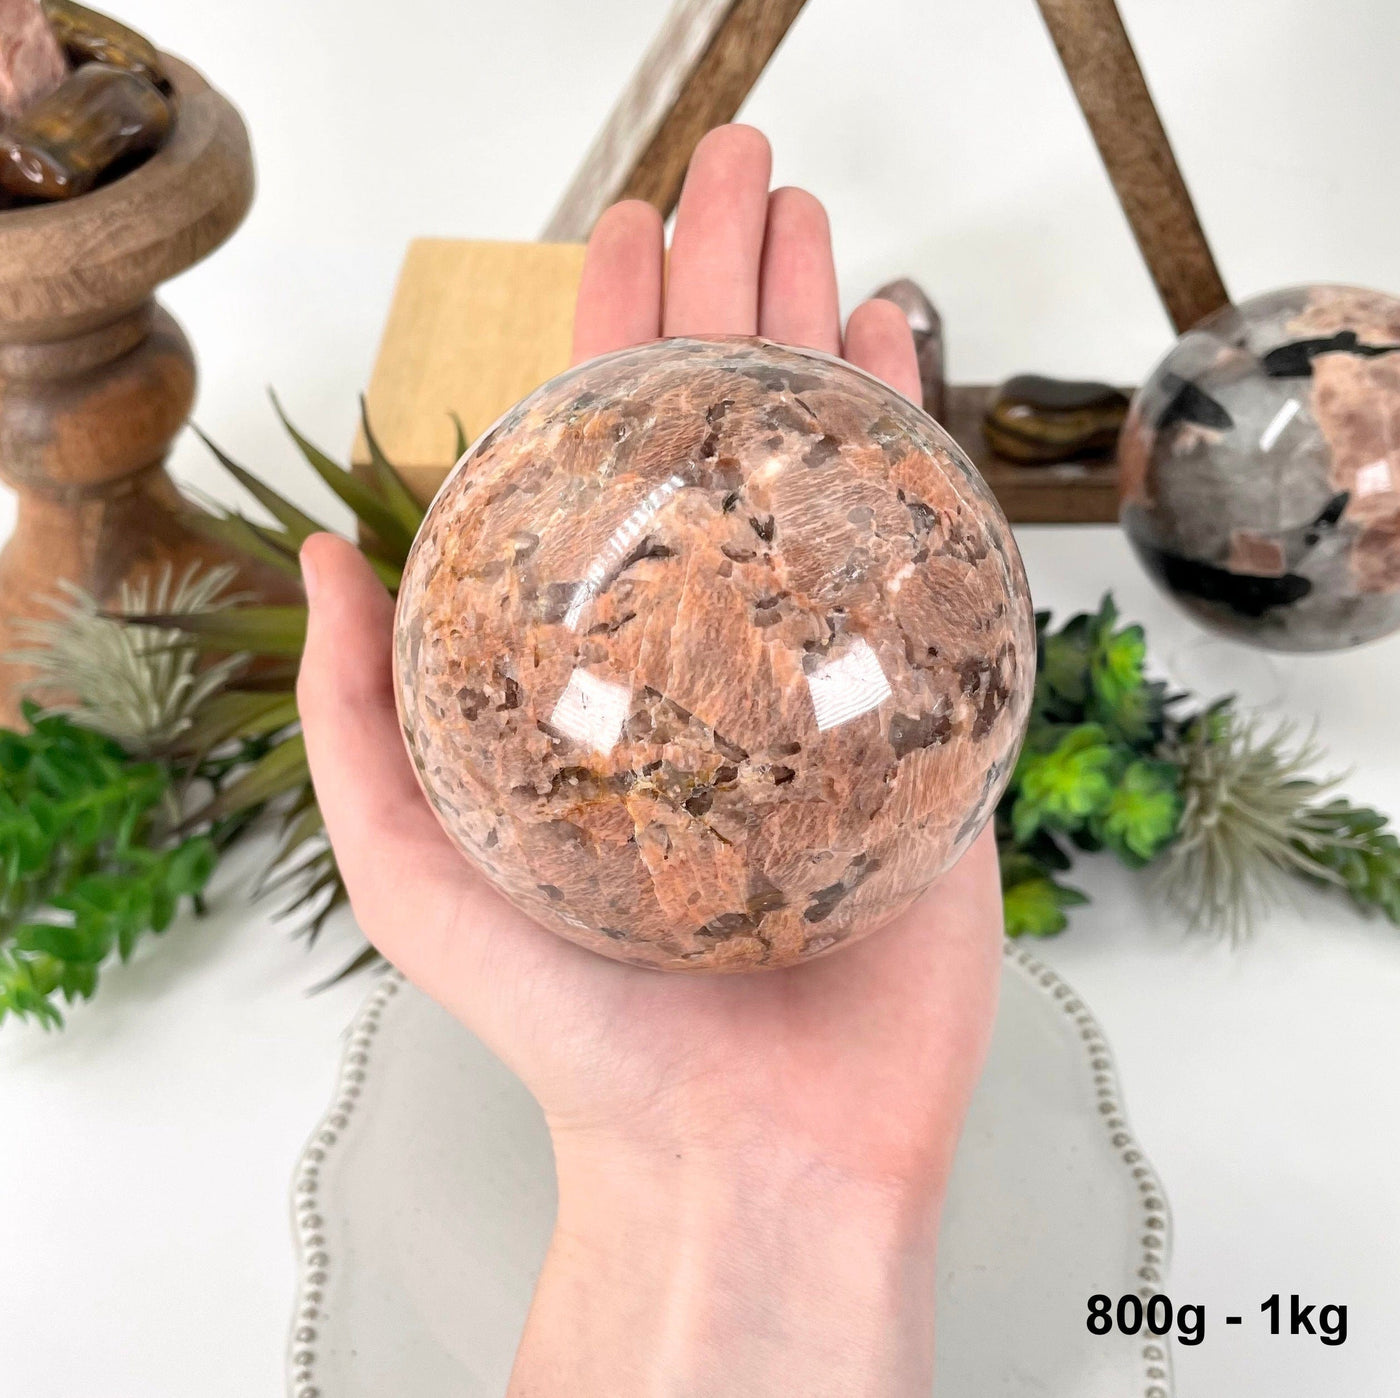 one 800g - 1kg sphere in hand for size reference